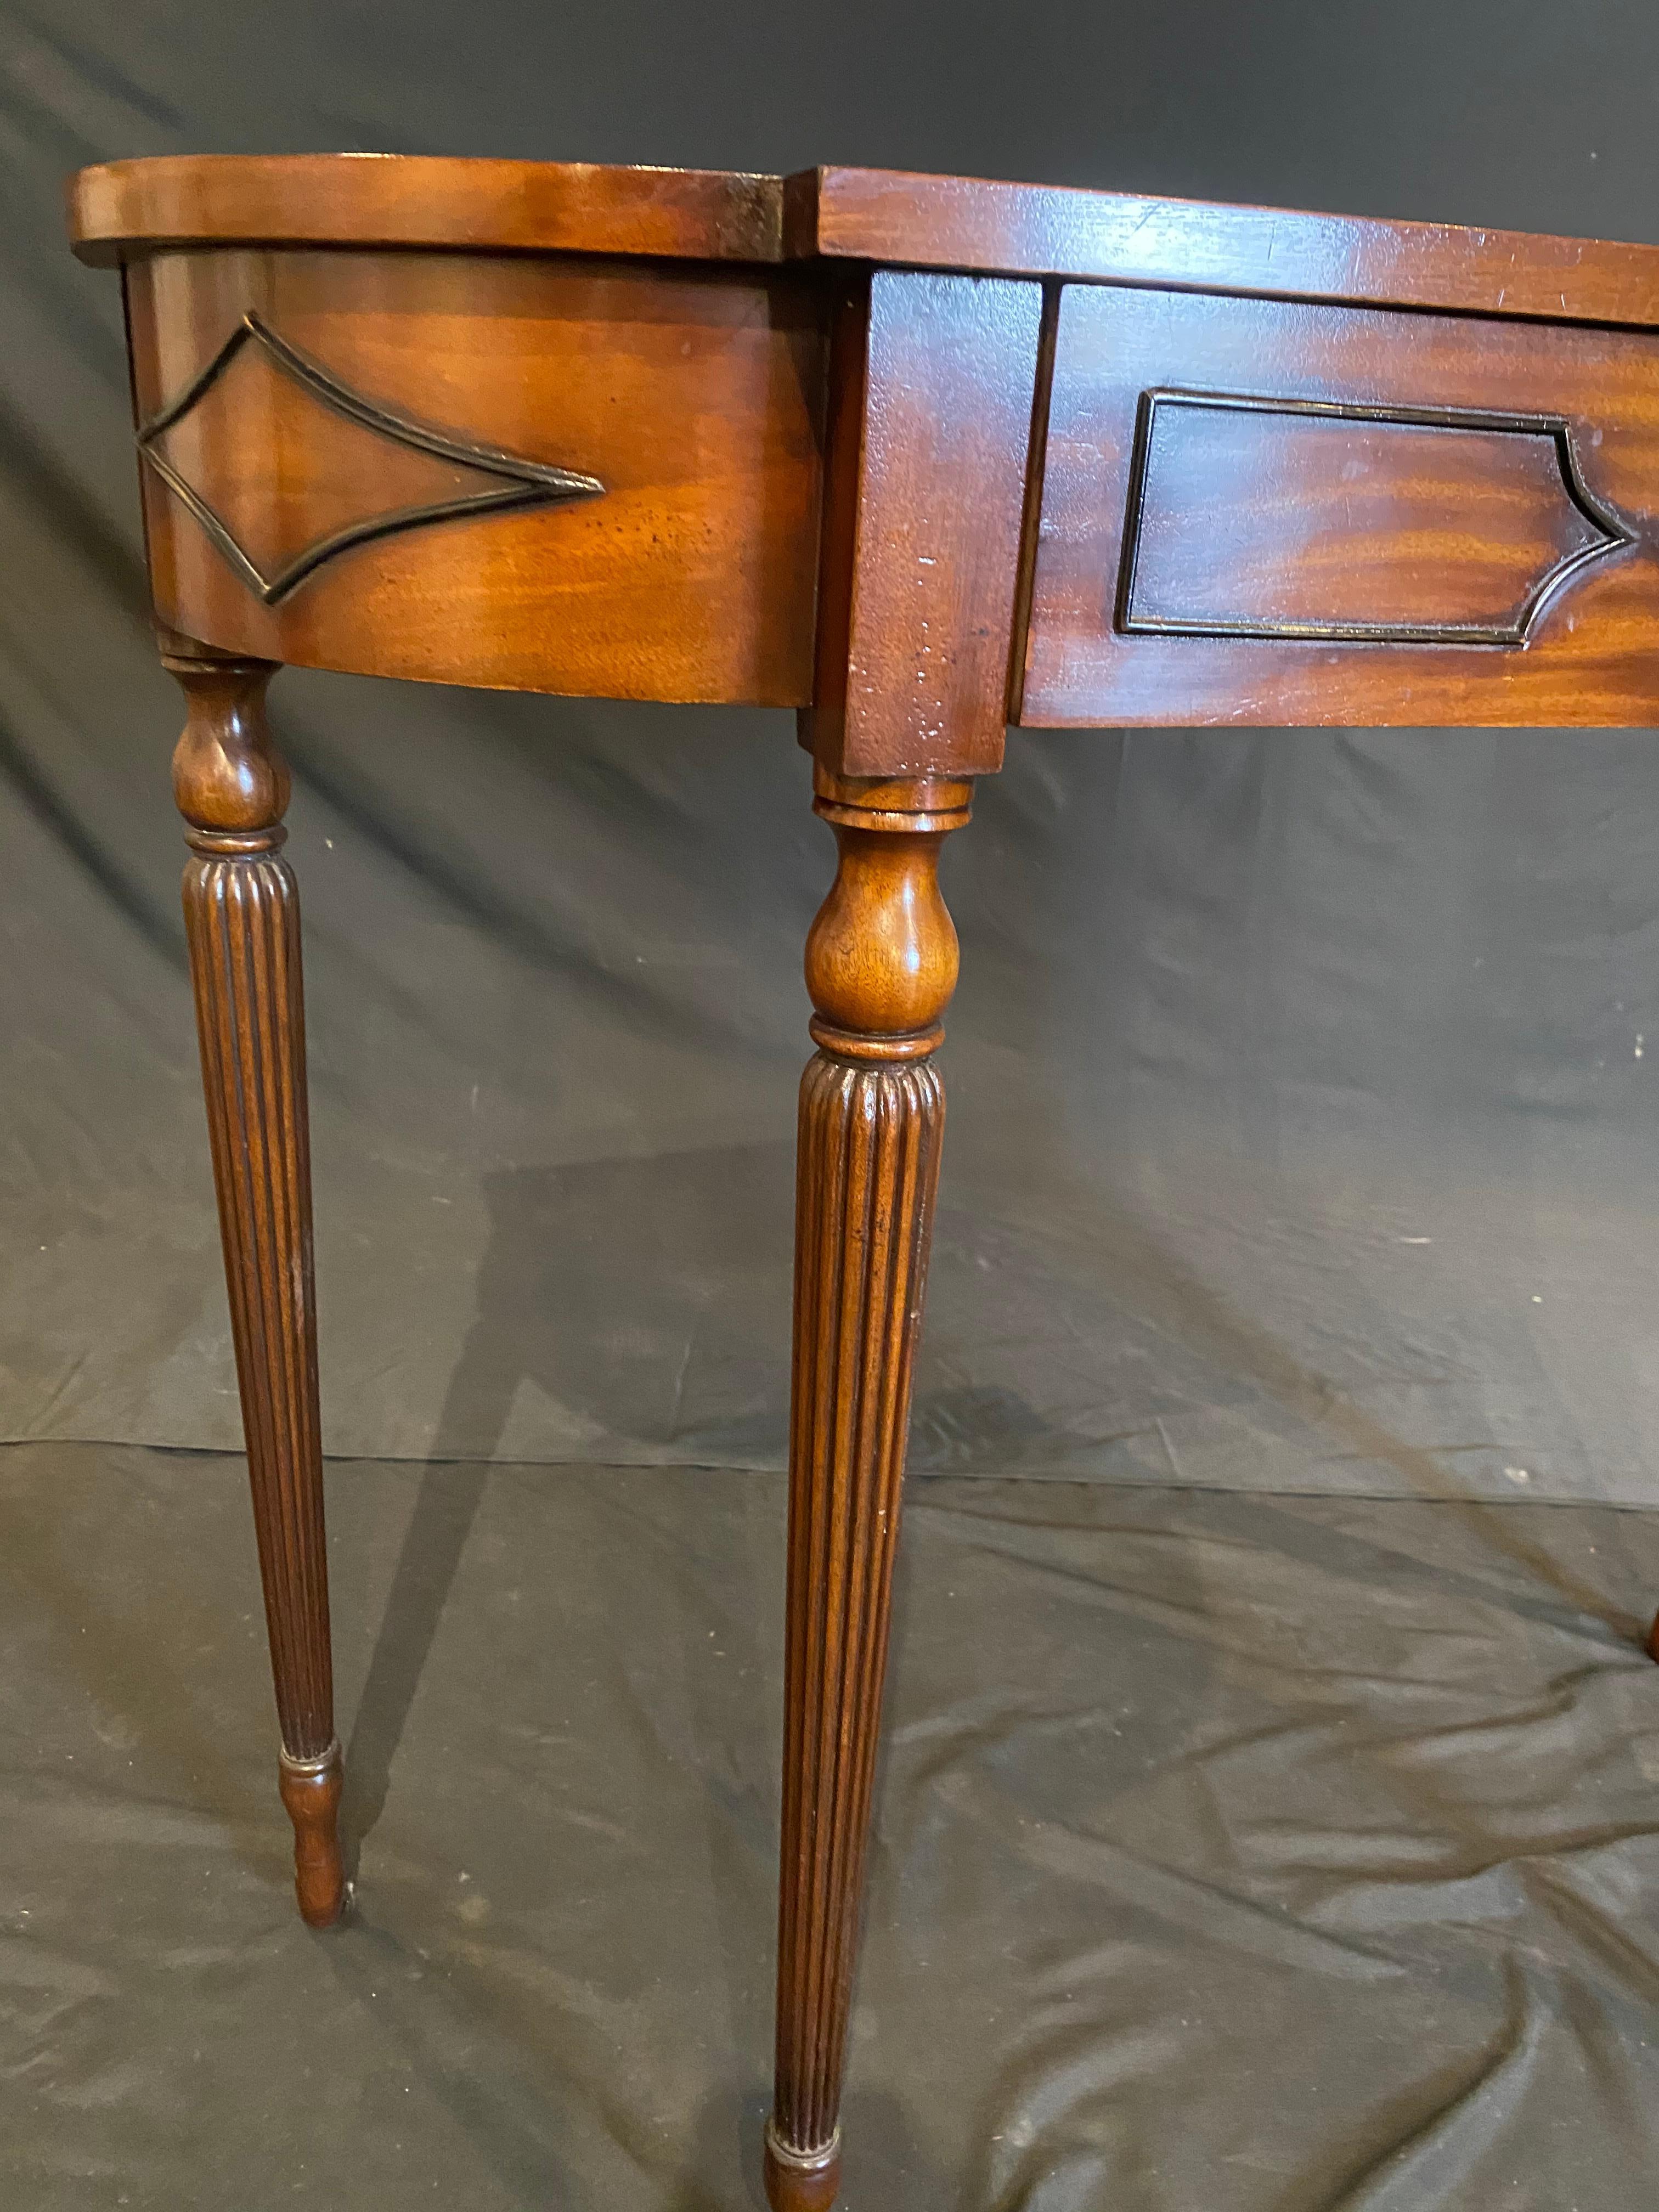 A very finely detailed mahogany console table by Arthur Brett, in mahogany with relief detail. Elegant curved lines and reeded legs add to the elegance of this excellently crafted piece for the discerning individual of Georgian style mahogany